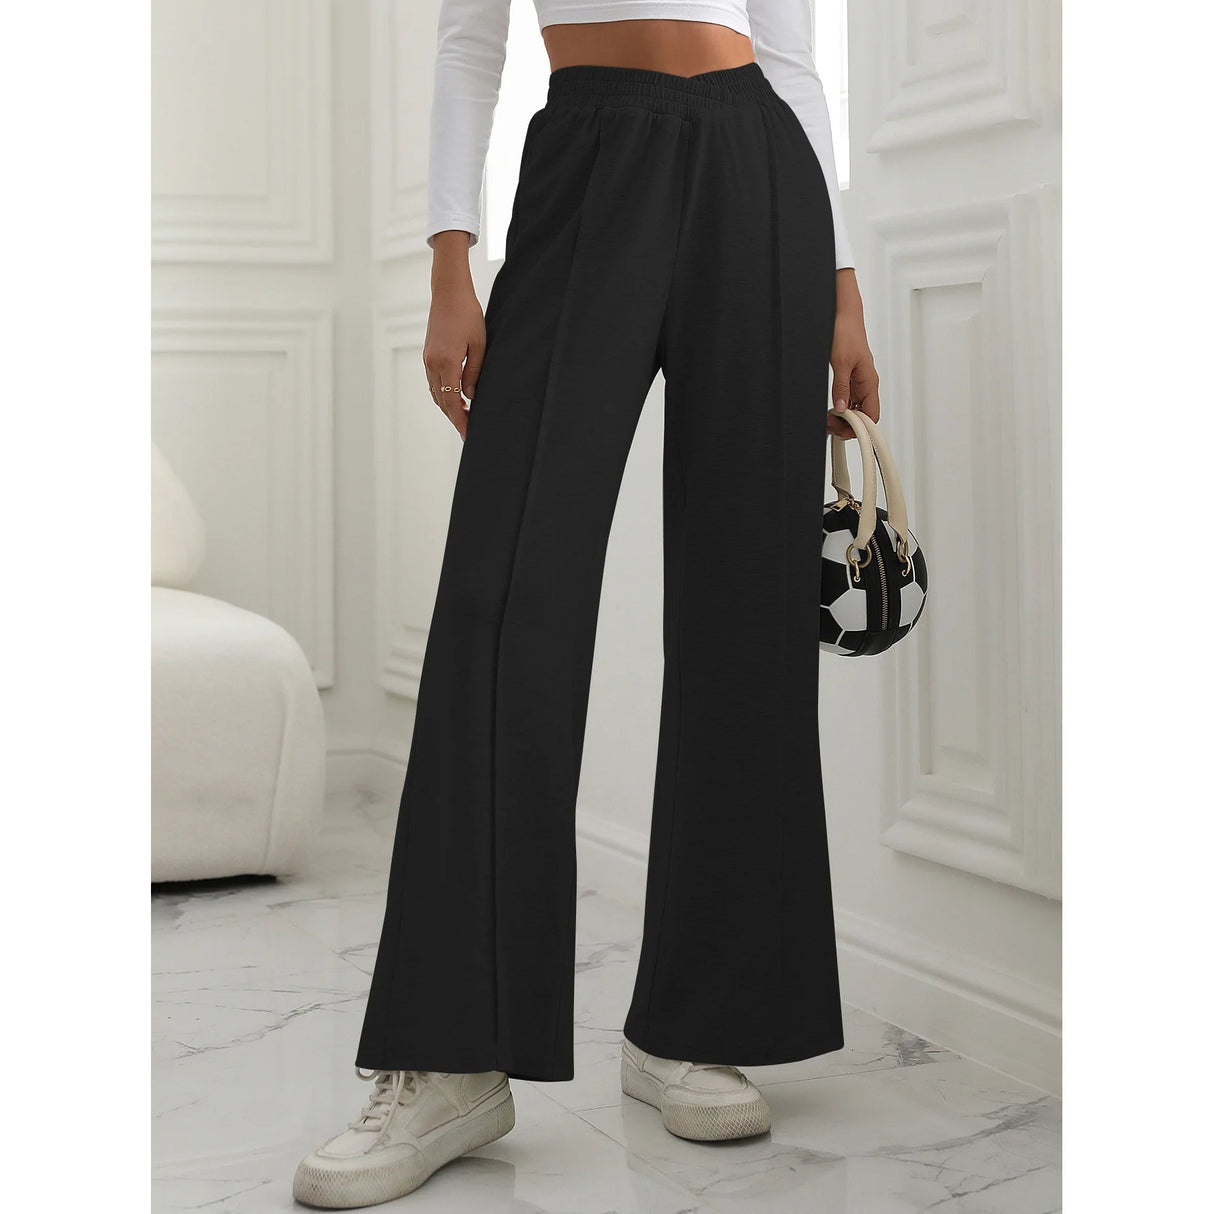 Wide leg pants with elastic waist and comfortable style Spandex/polyester